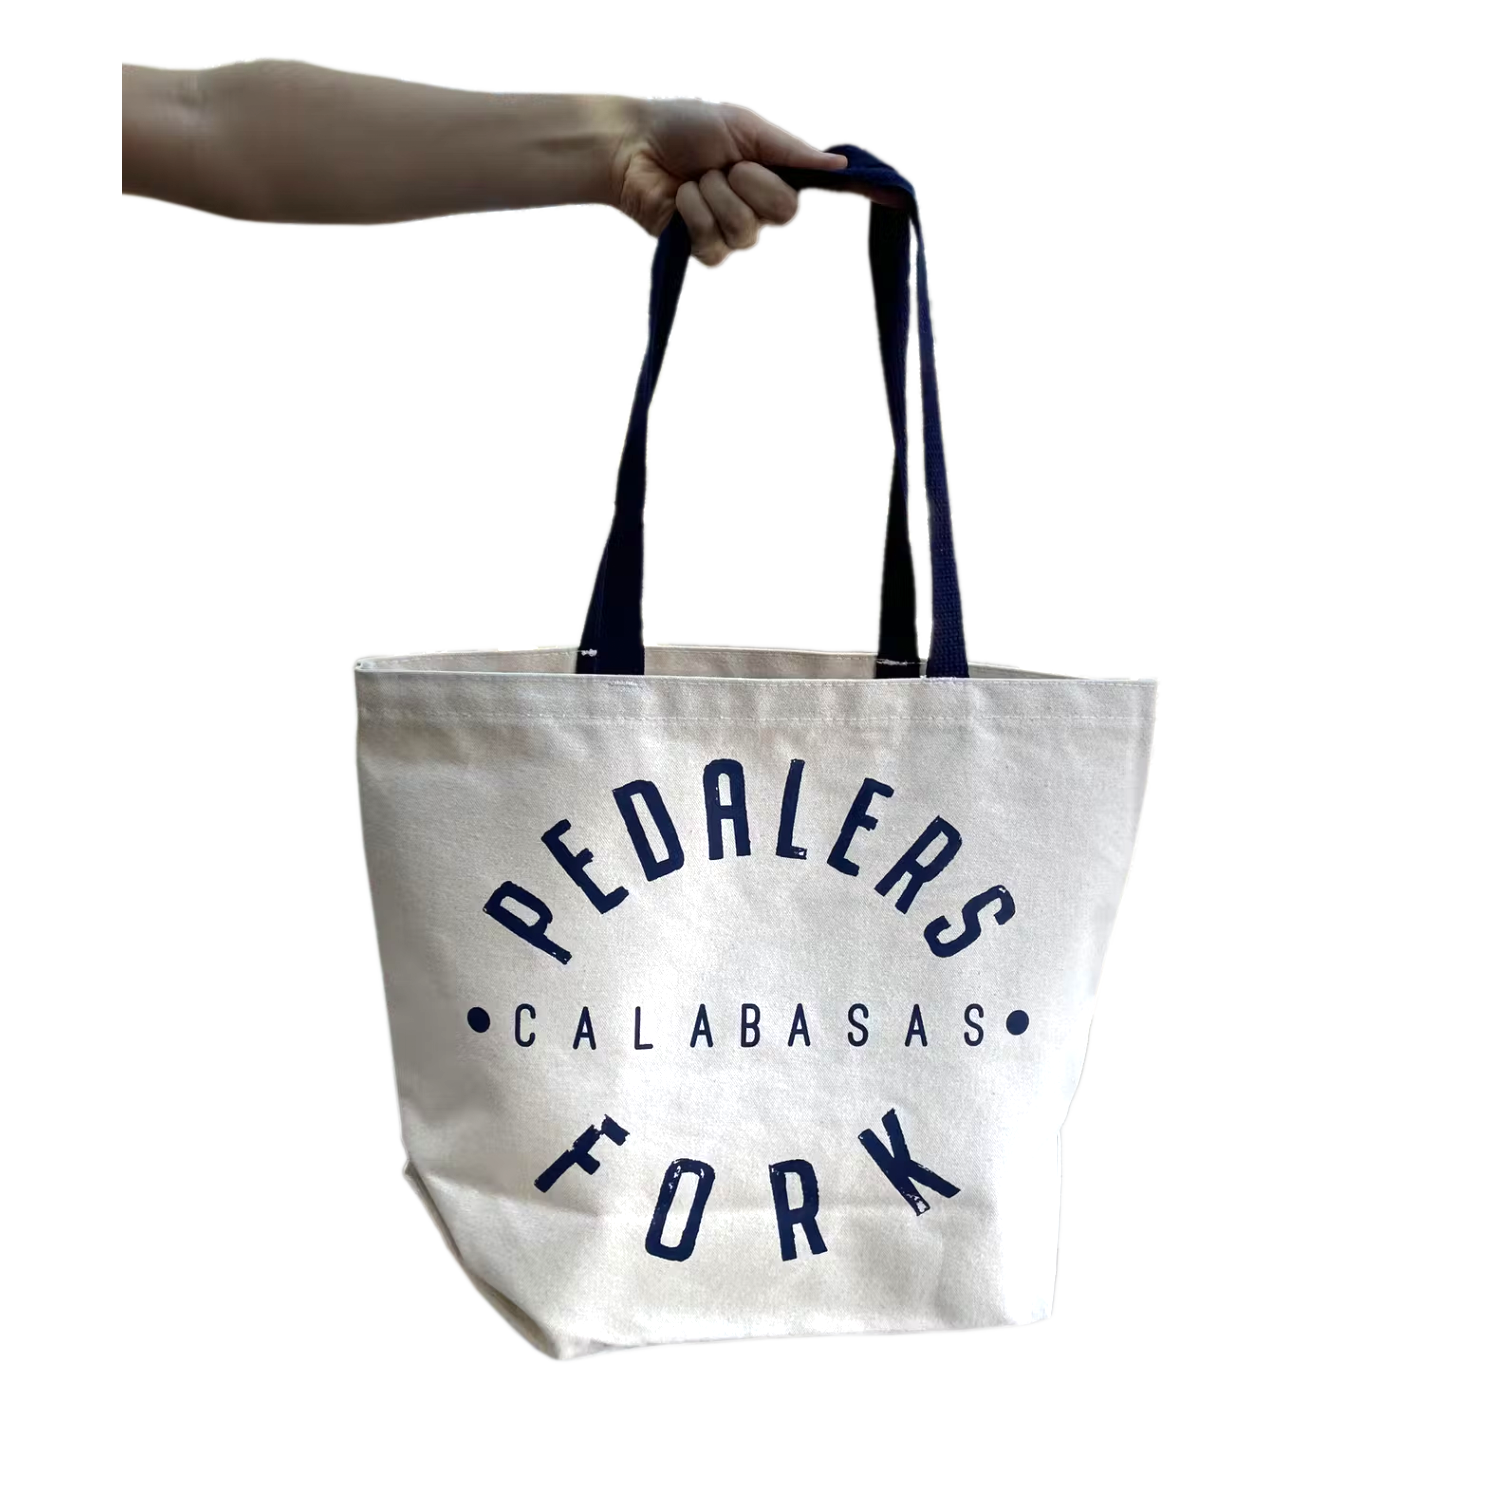 White tote bag with blue strap, Pedalers Fork logo with Calabasas in between